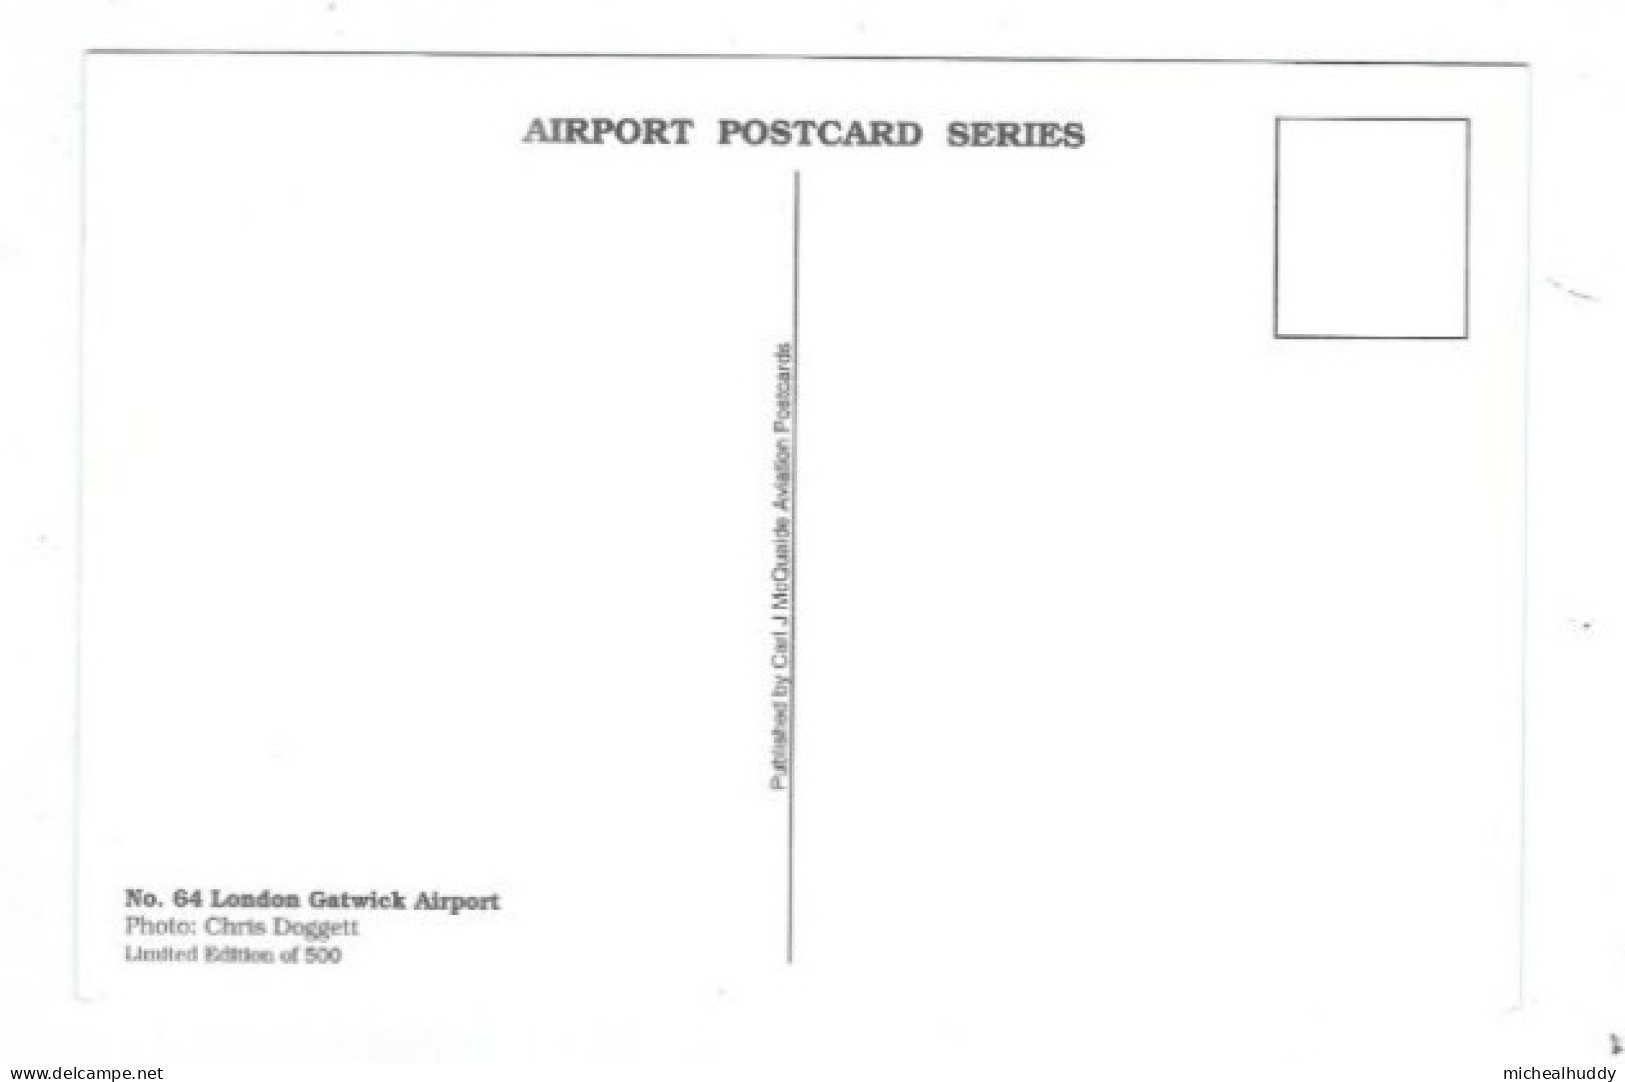 POSTCARD   PUBL BY  BY C MCQUAIDE IN HIS AIRPORT SERRIES  LONDON GATWICK  CARD N0 64 - Aerodromes